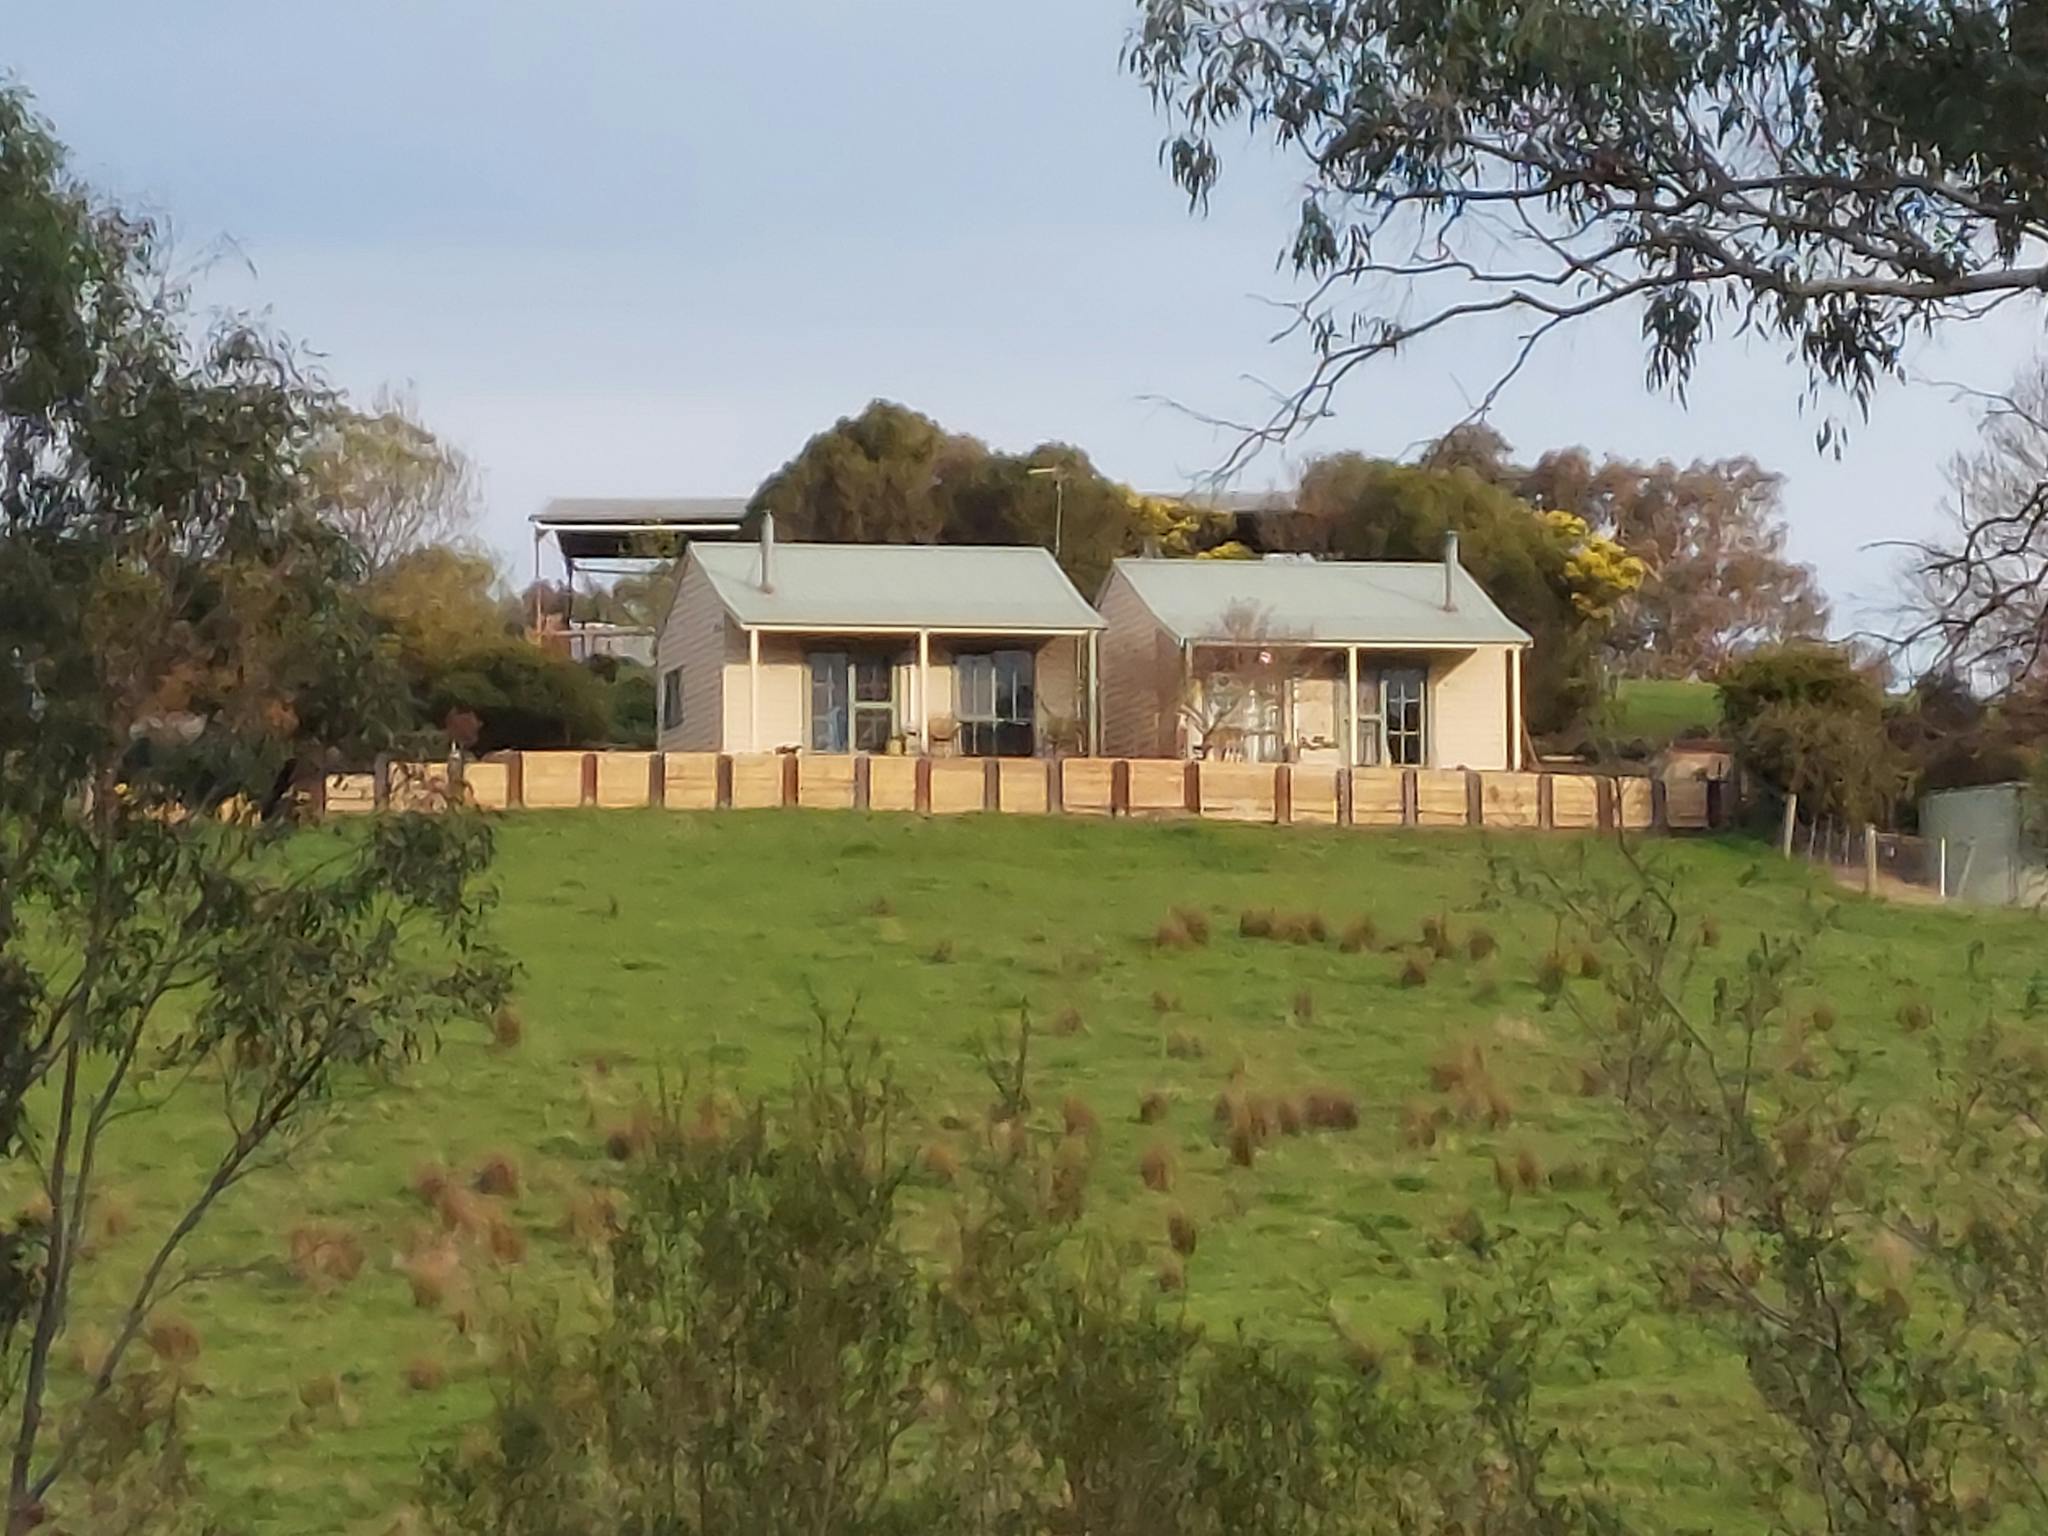 The two cottages sit side by side looking out onto a serene rural view.